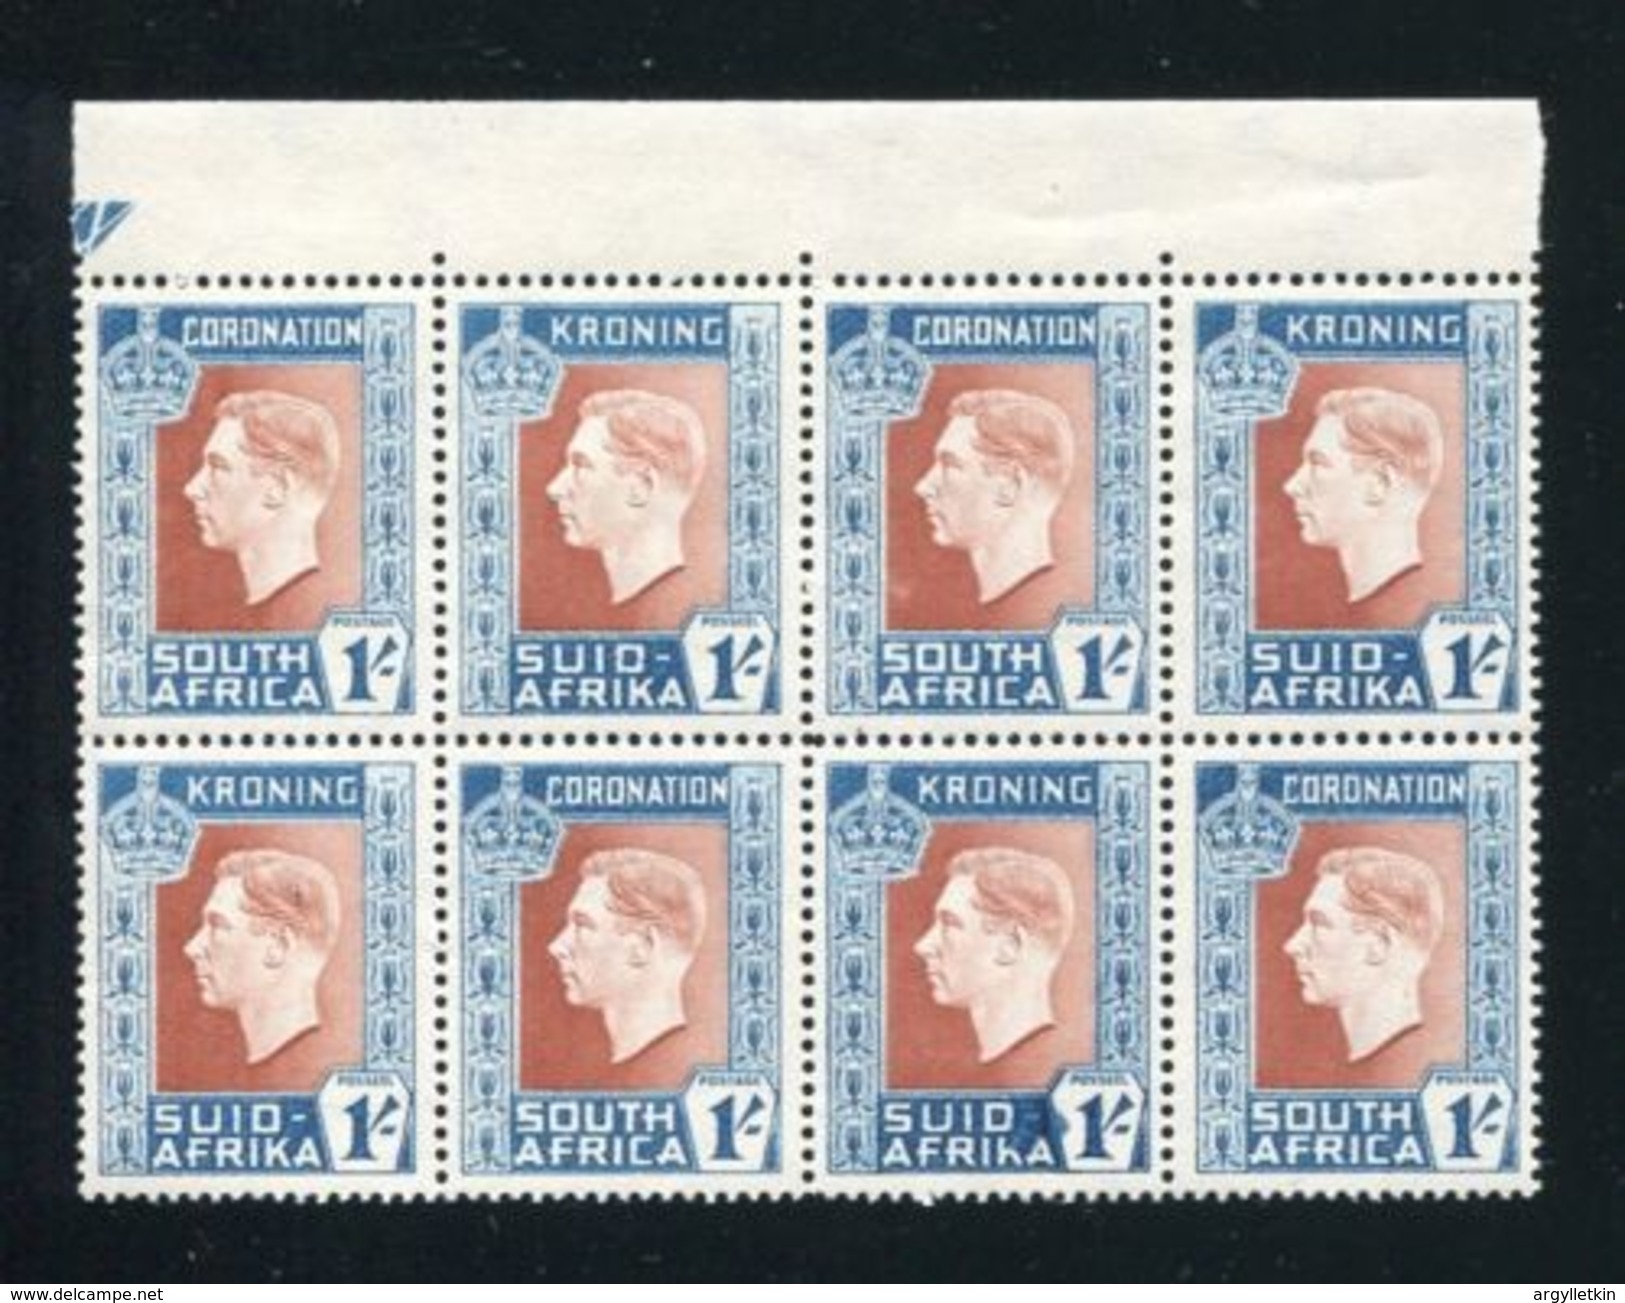 SOUTH AFRICA GEORGE SIXTH CORONATION BLOCK VARIETY 1937 - Unclassified